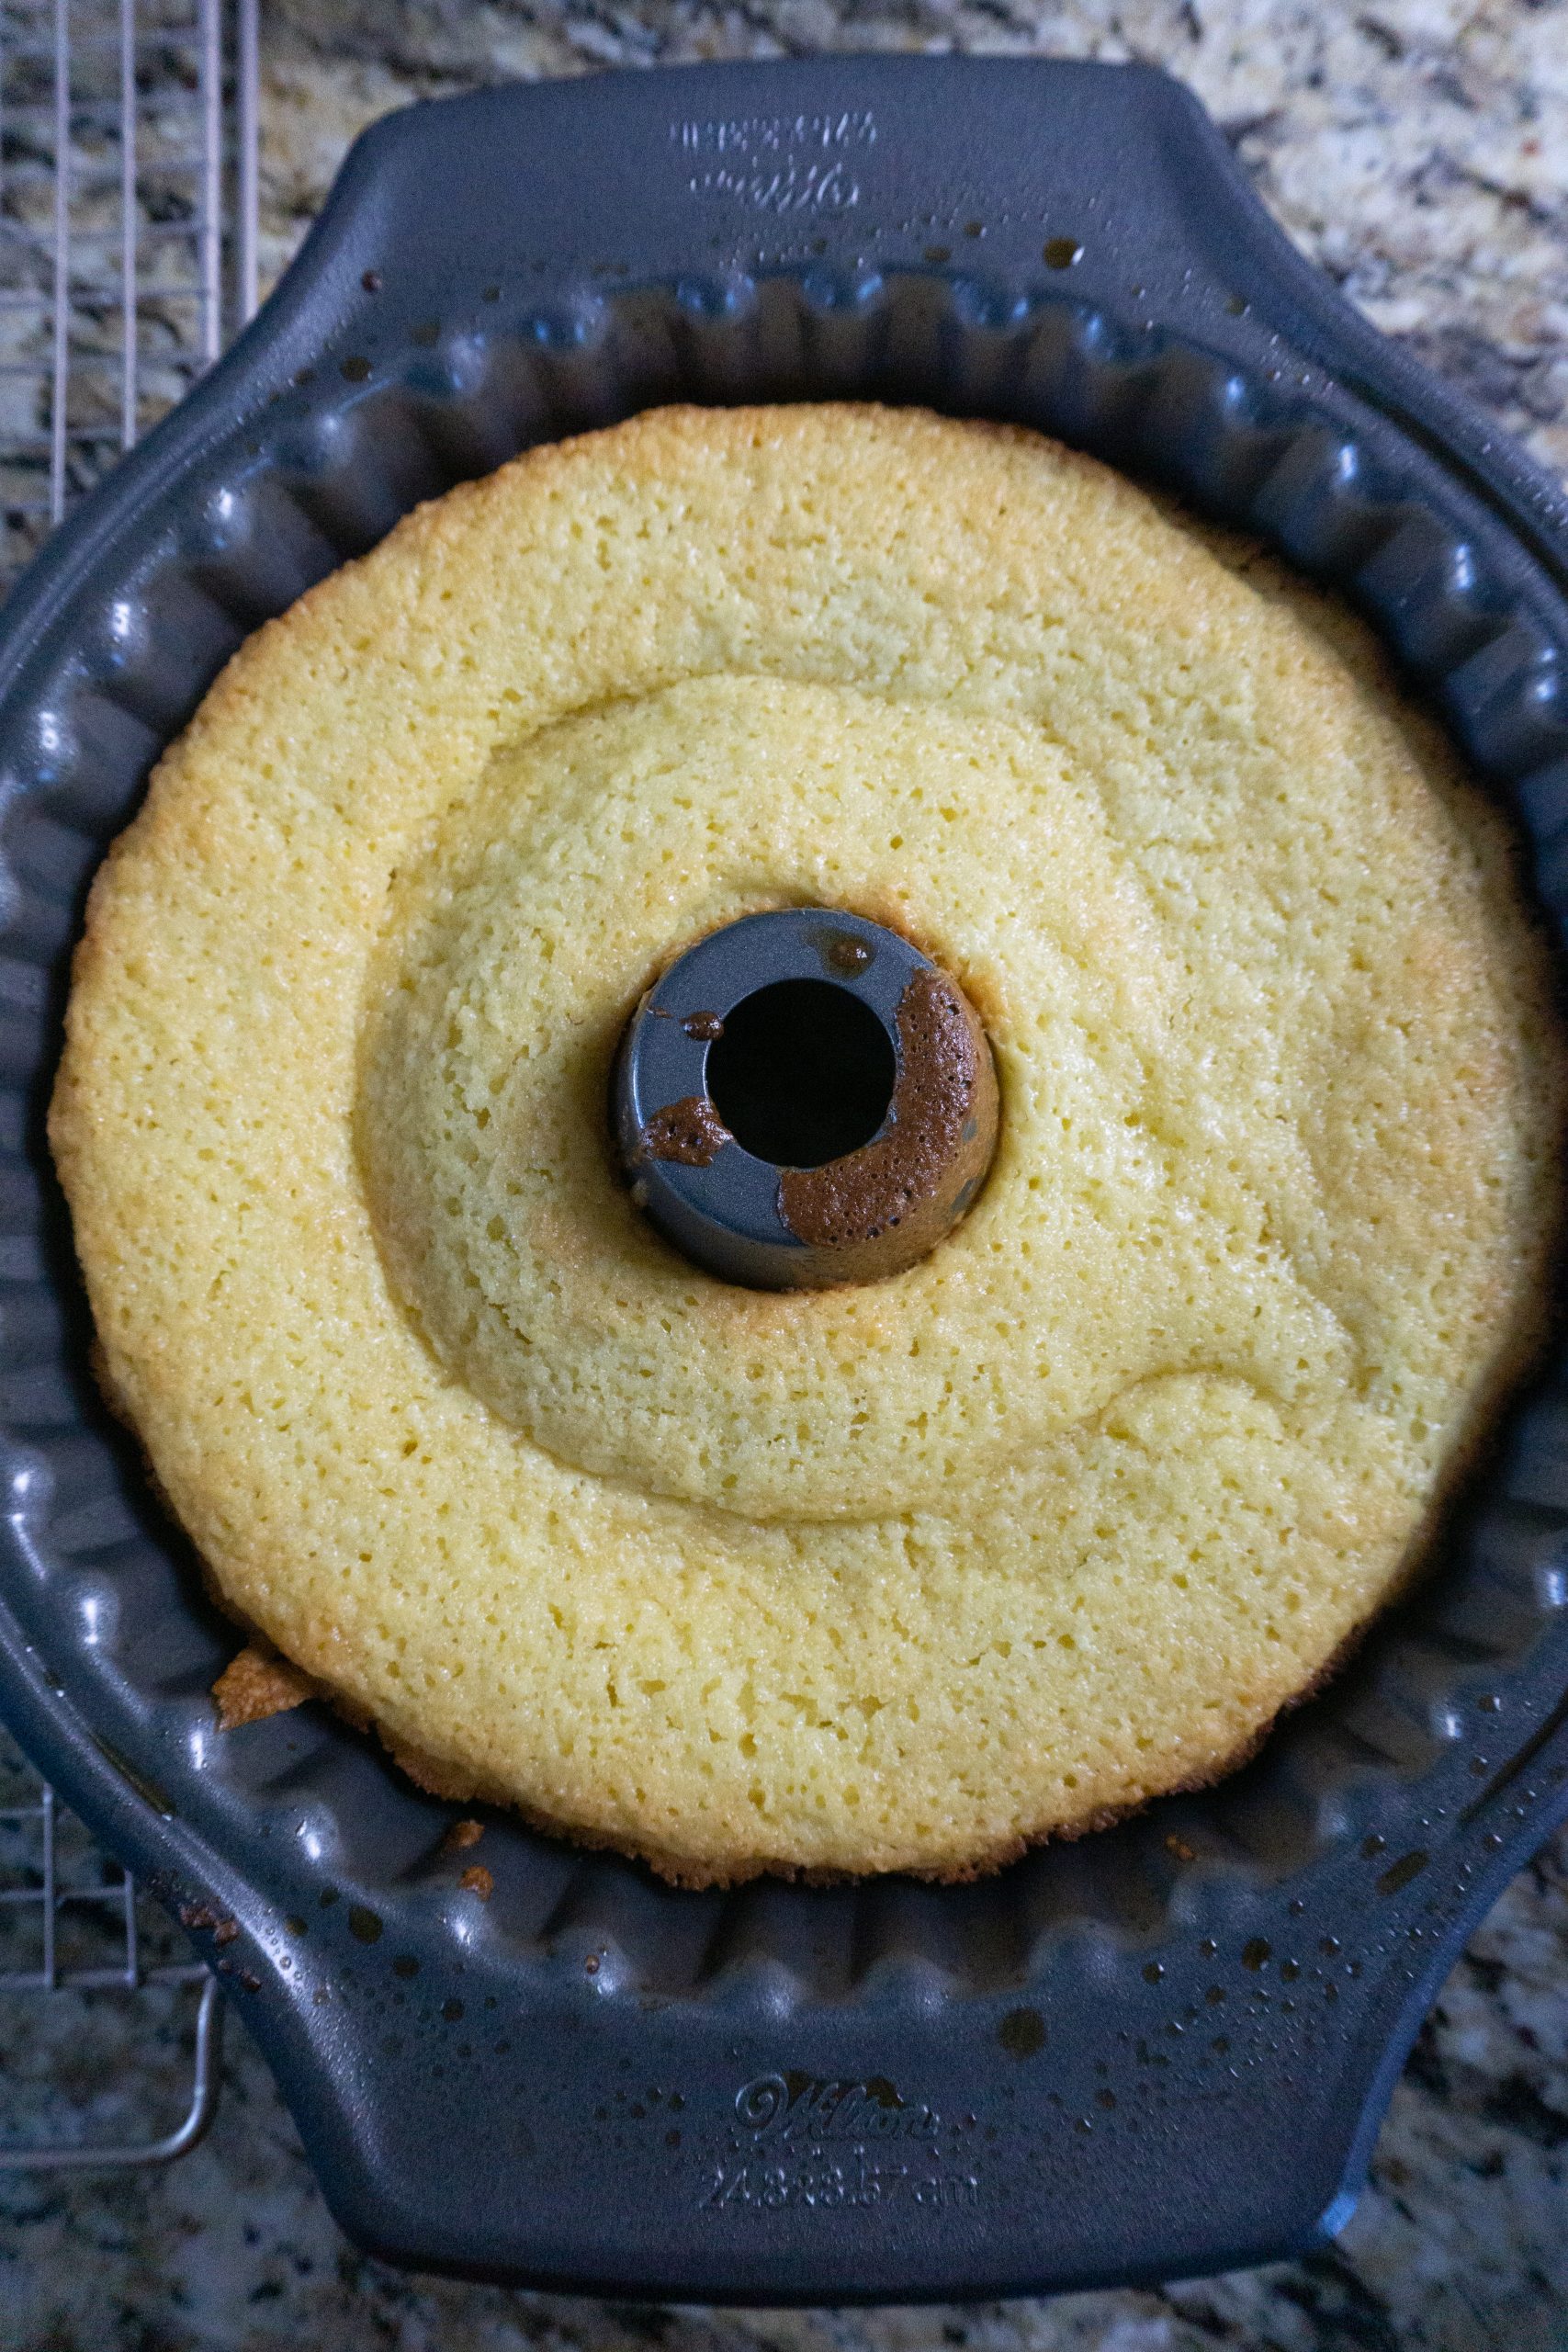 The baked cake cooling in the pan.